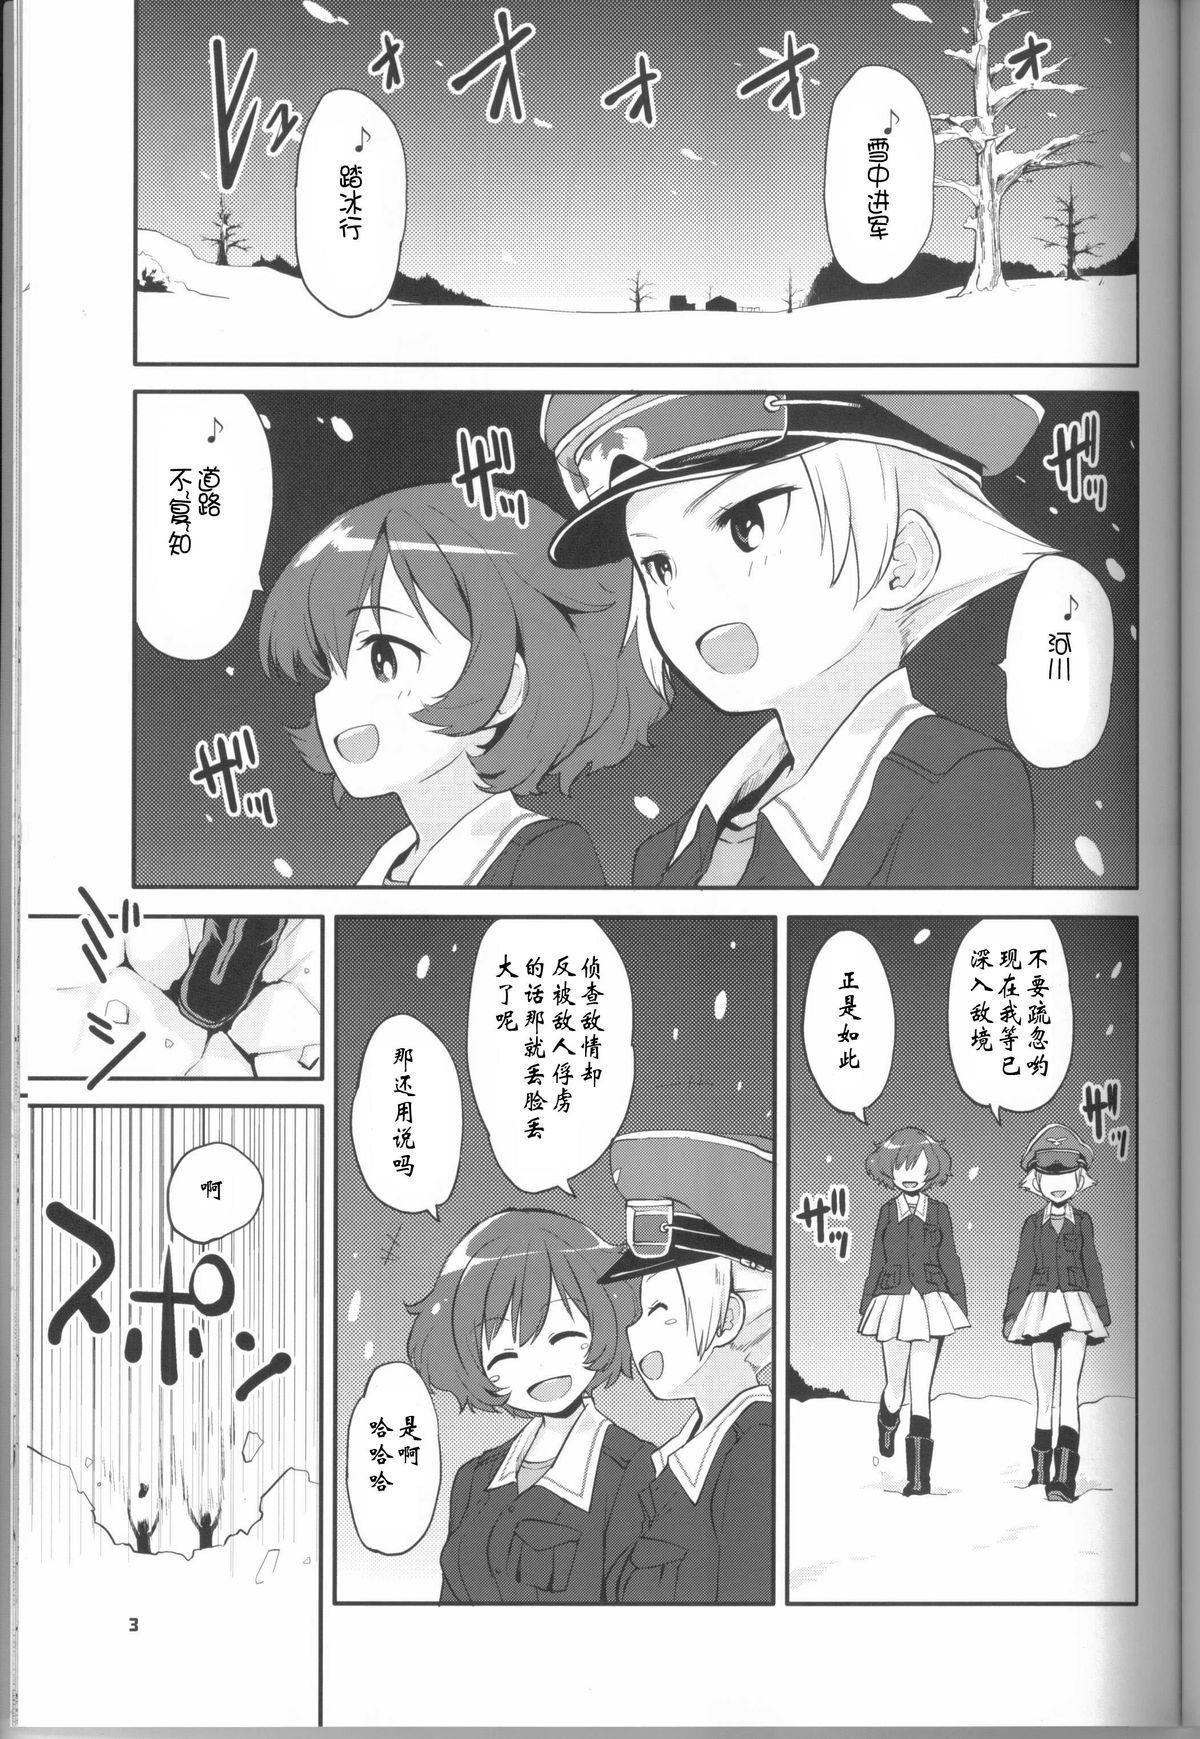 Anal The General Frost Has Come! - Girls und panzer Amateur Blowjob - Page 2